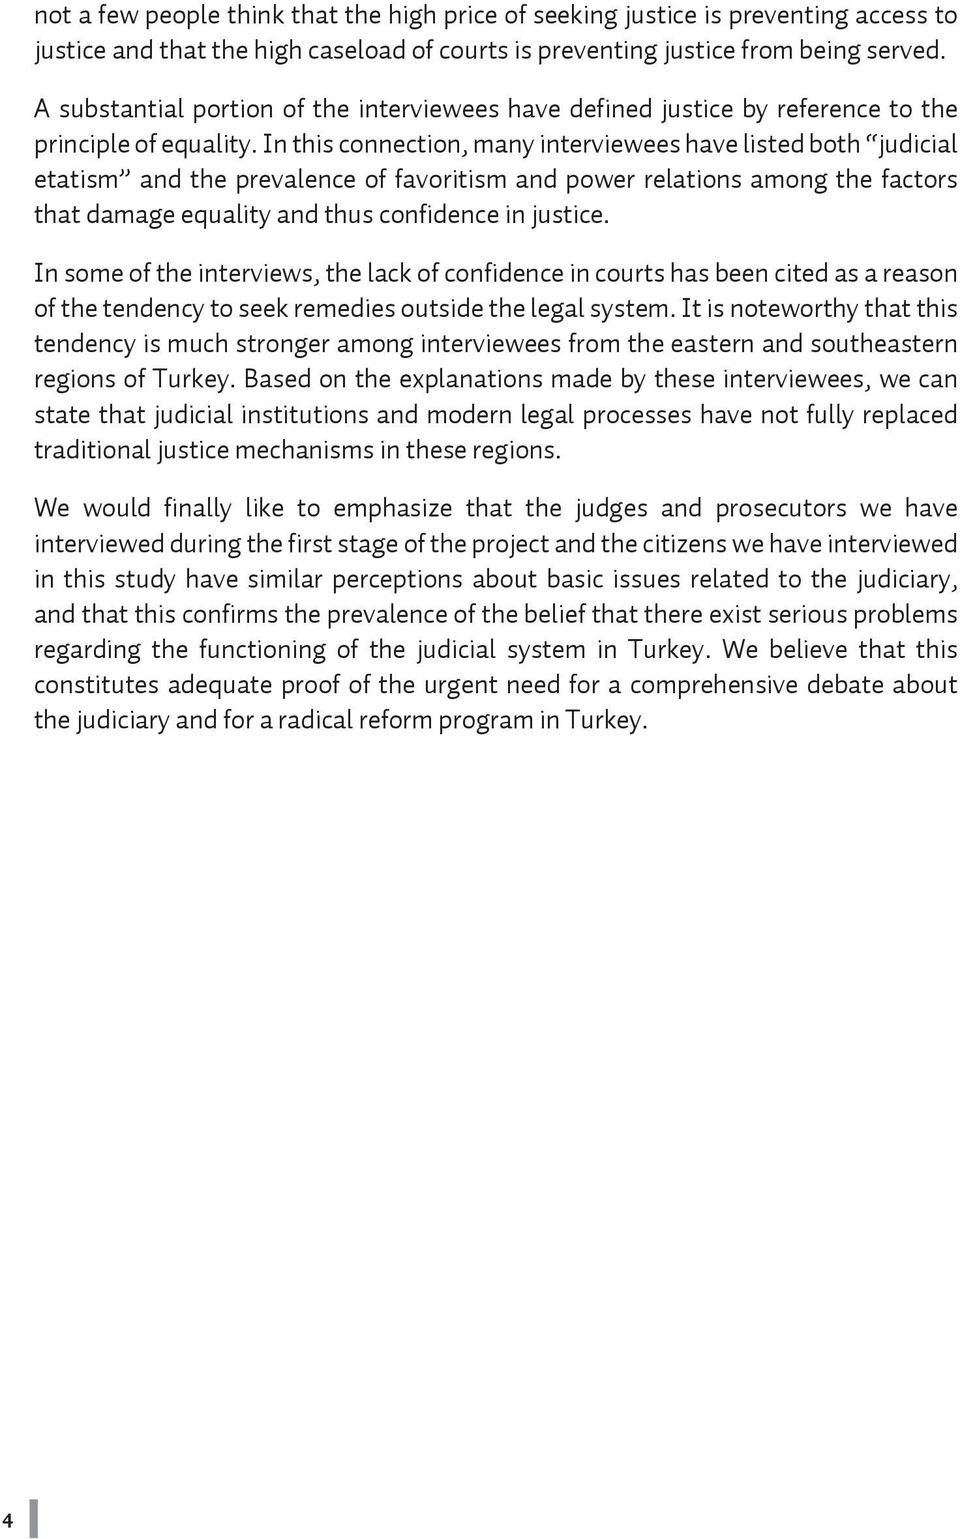 In this connection, many interviewees have listed both judicial etatism and the prevalence of favoritism and power relations among the factors that damage equality and thus confidence in justice.